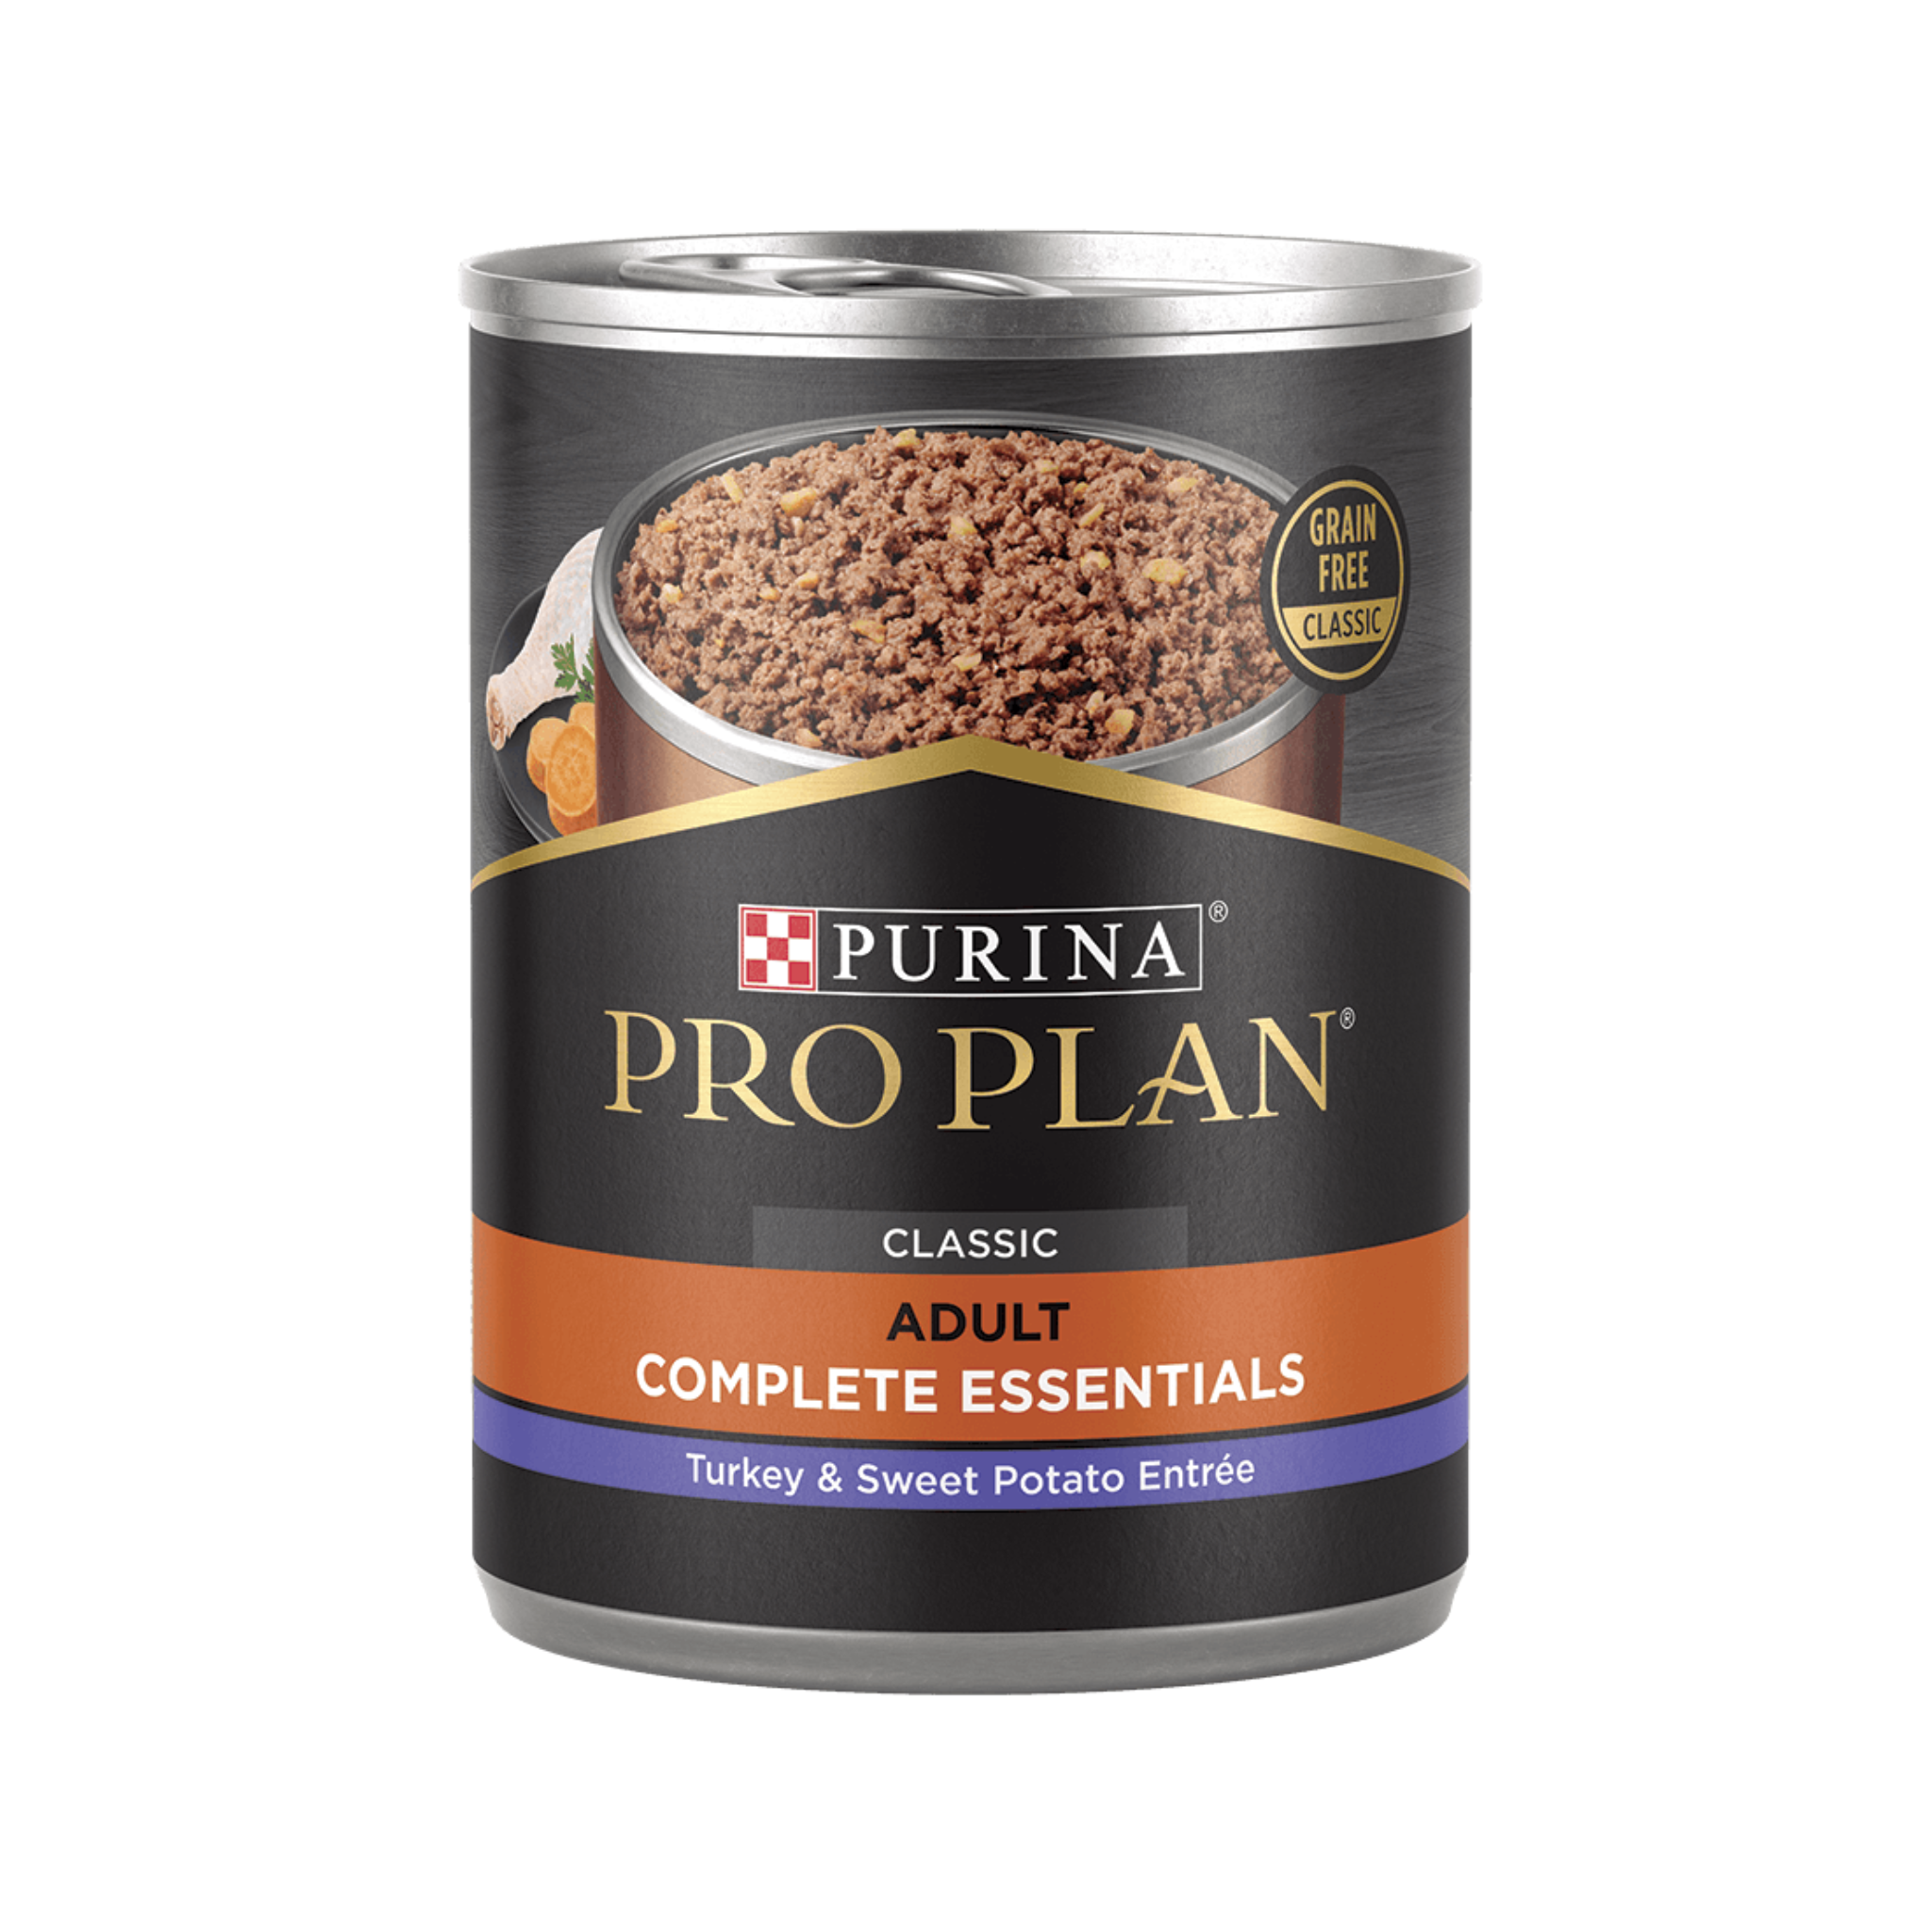 Pro Plan Complete Essentials Grain Free Turkey & Carrots Adult Dog Canned